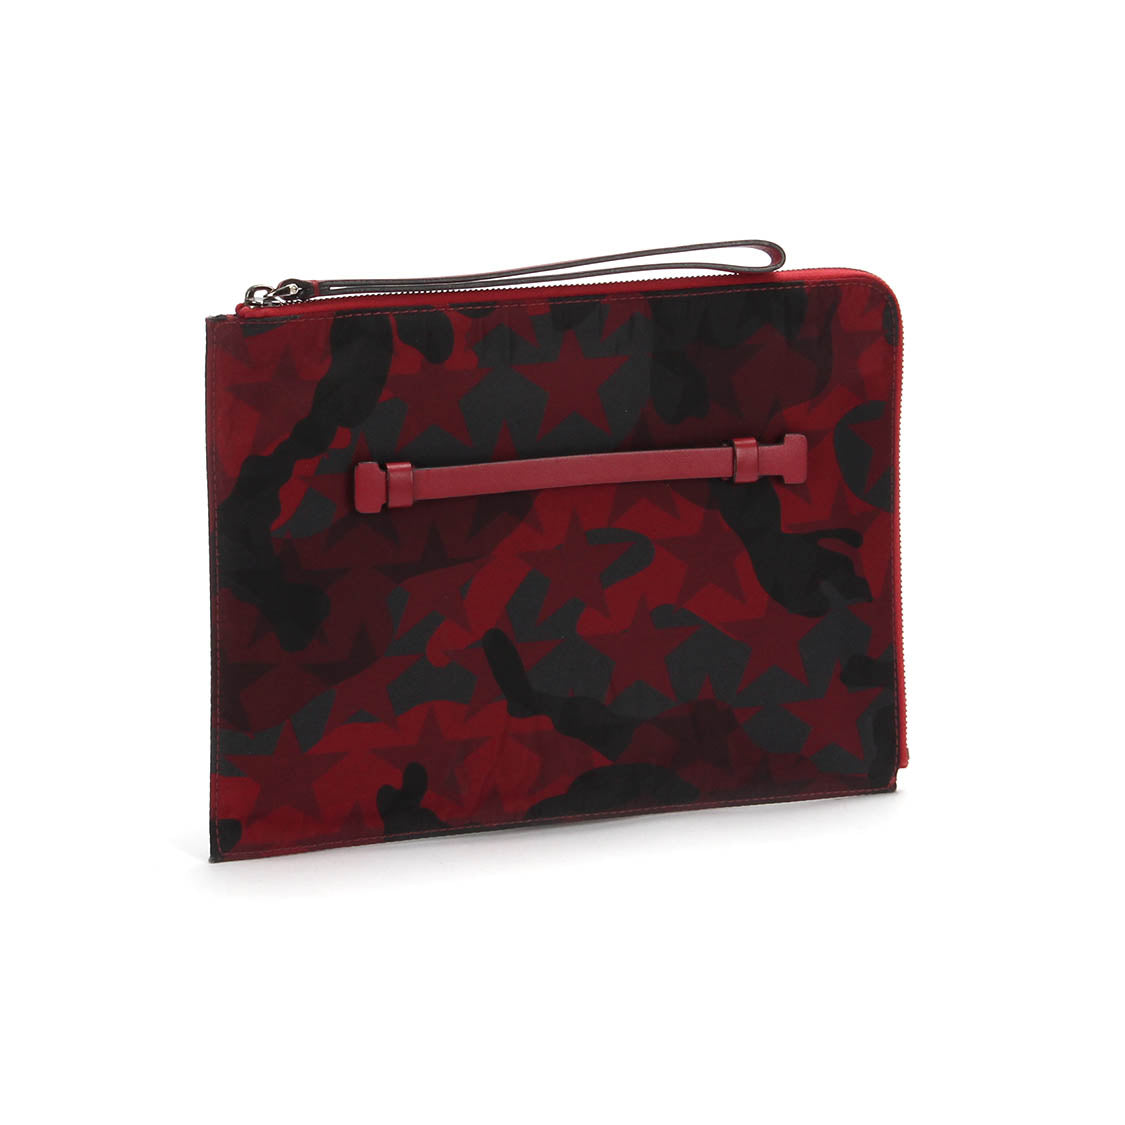 Camouflage Clutch Bag